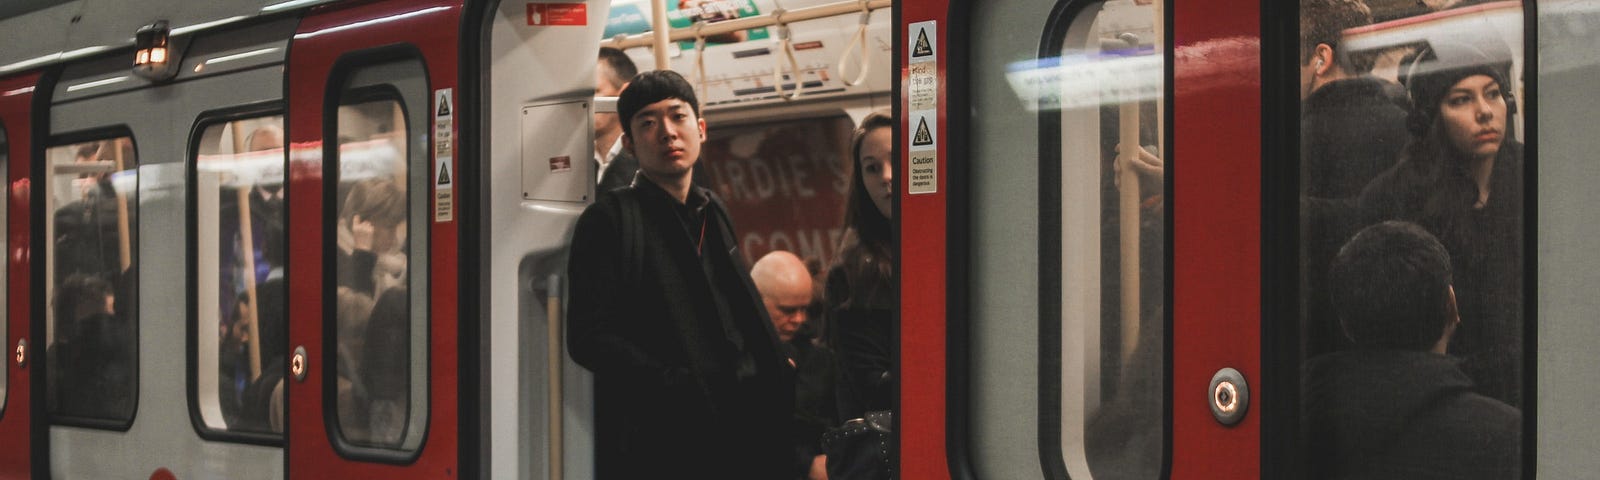 Picture of a tube carriage with the doors open and a man looking out